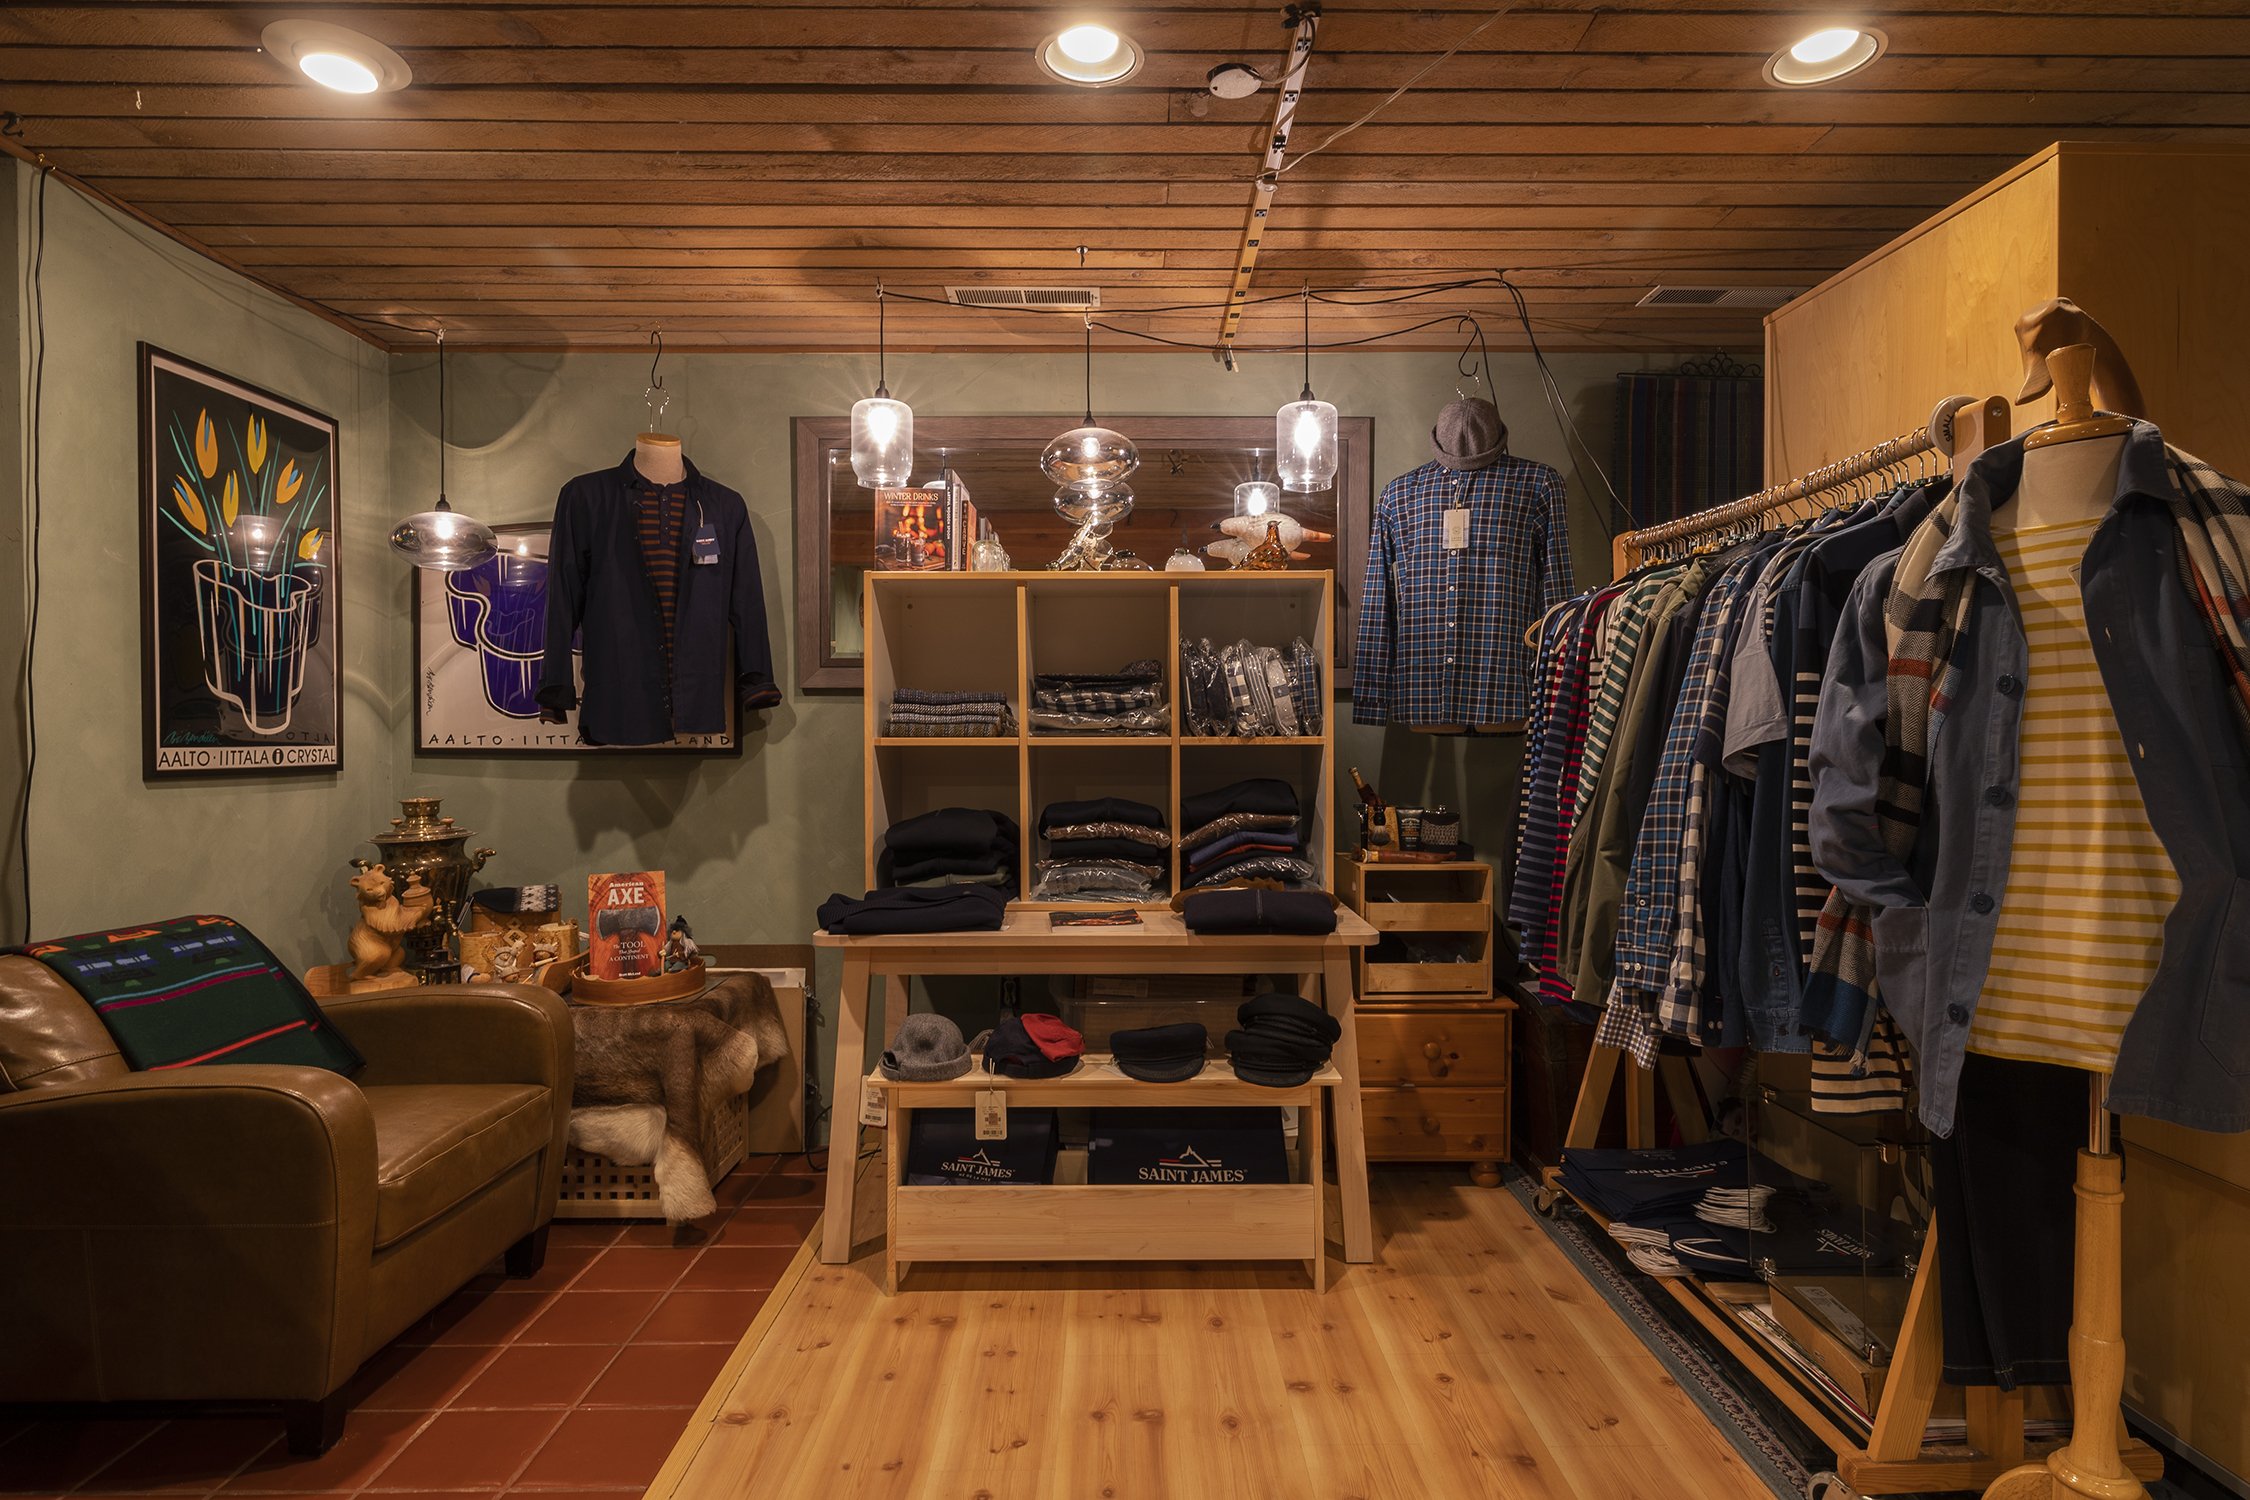 Display of Saint James clothing at Chalet in the Woods